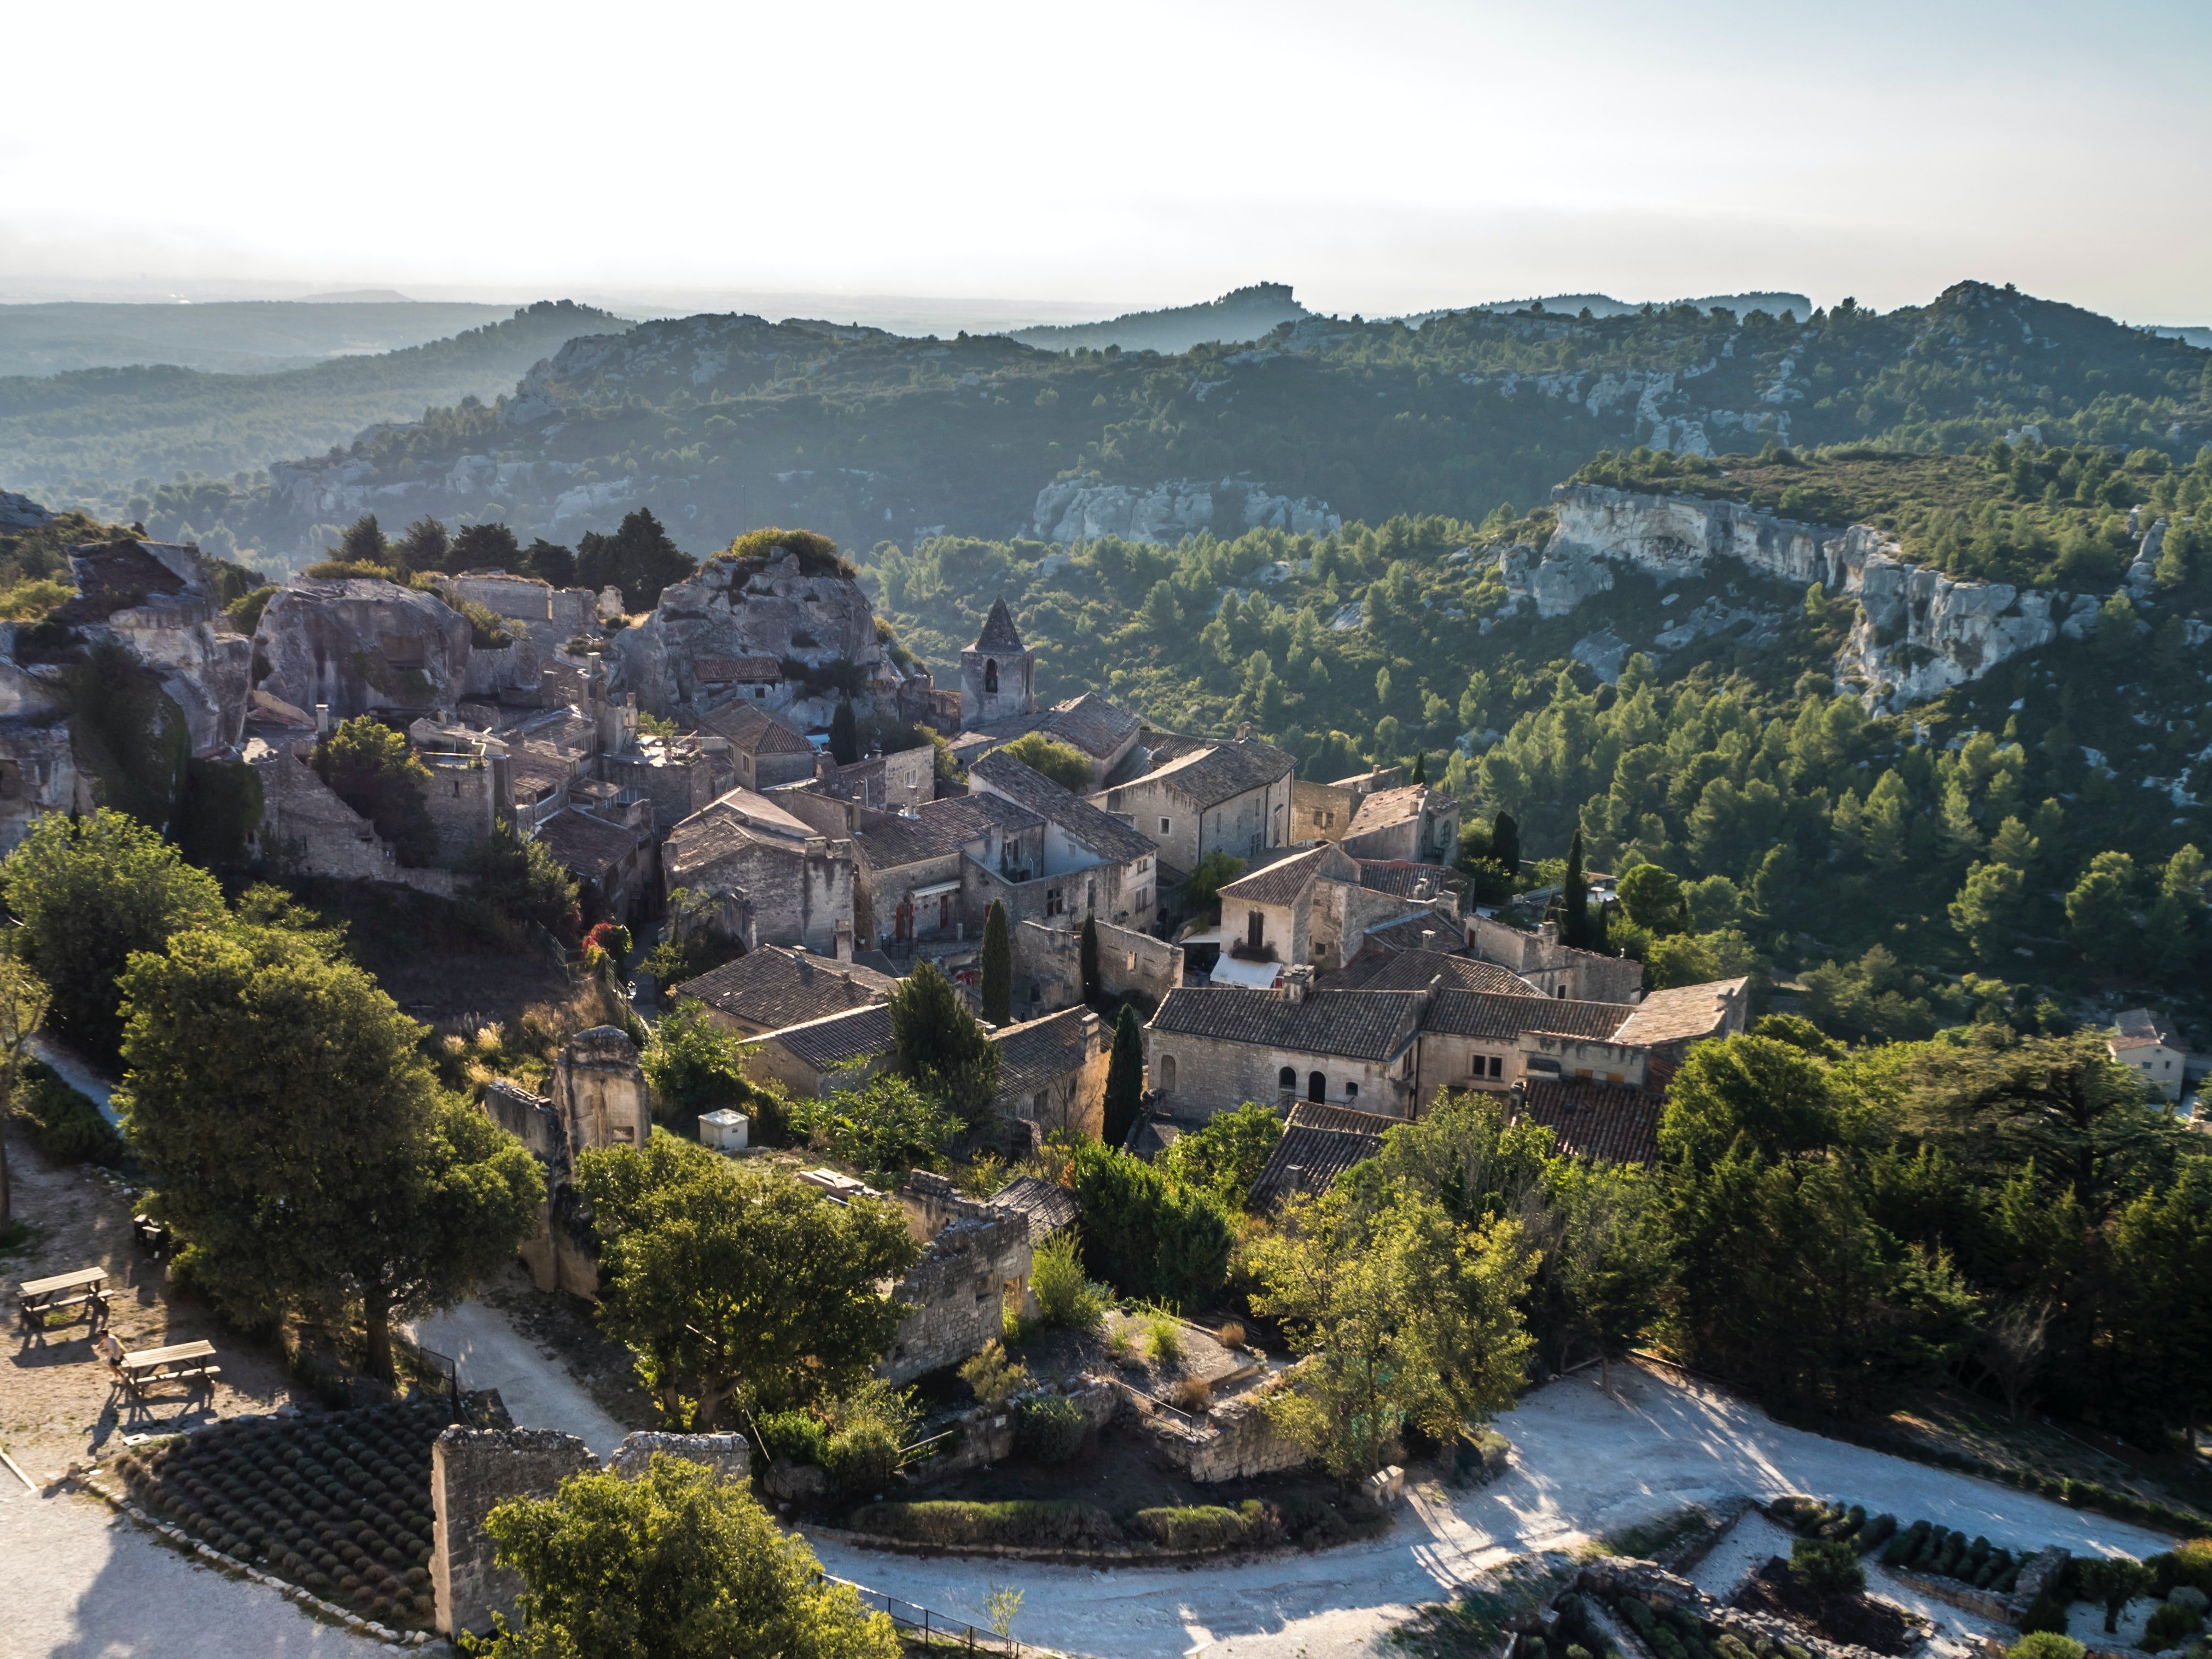 An old French village in the hilly landscapes of Provence